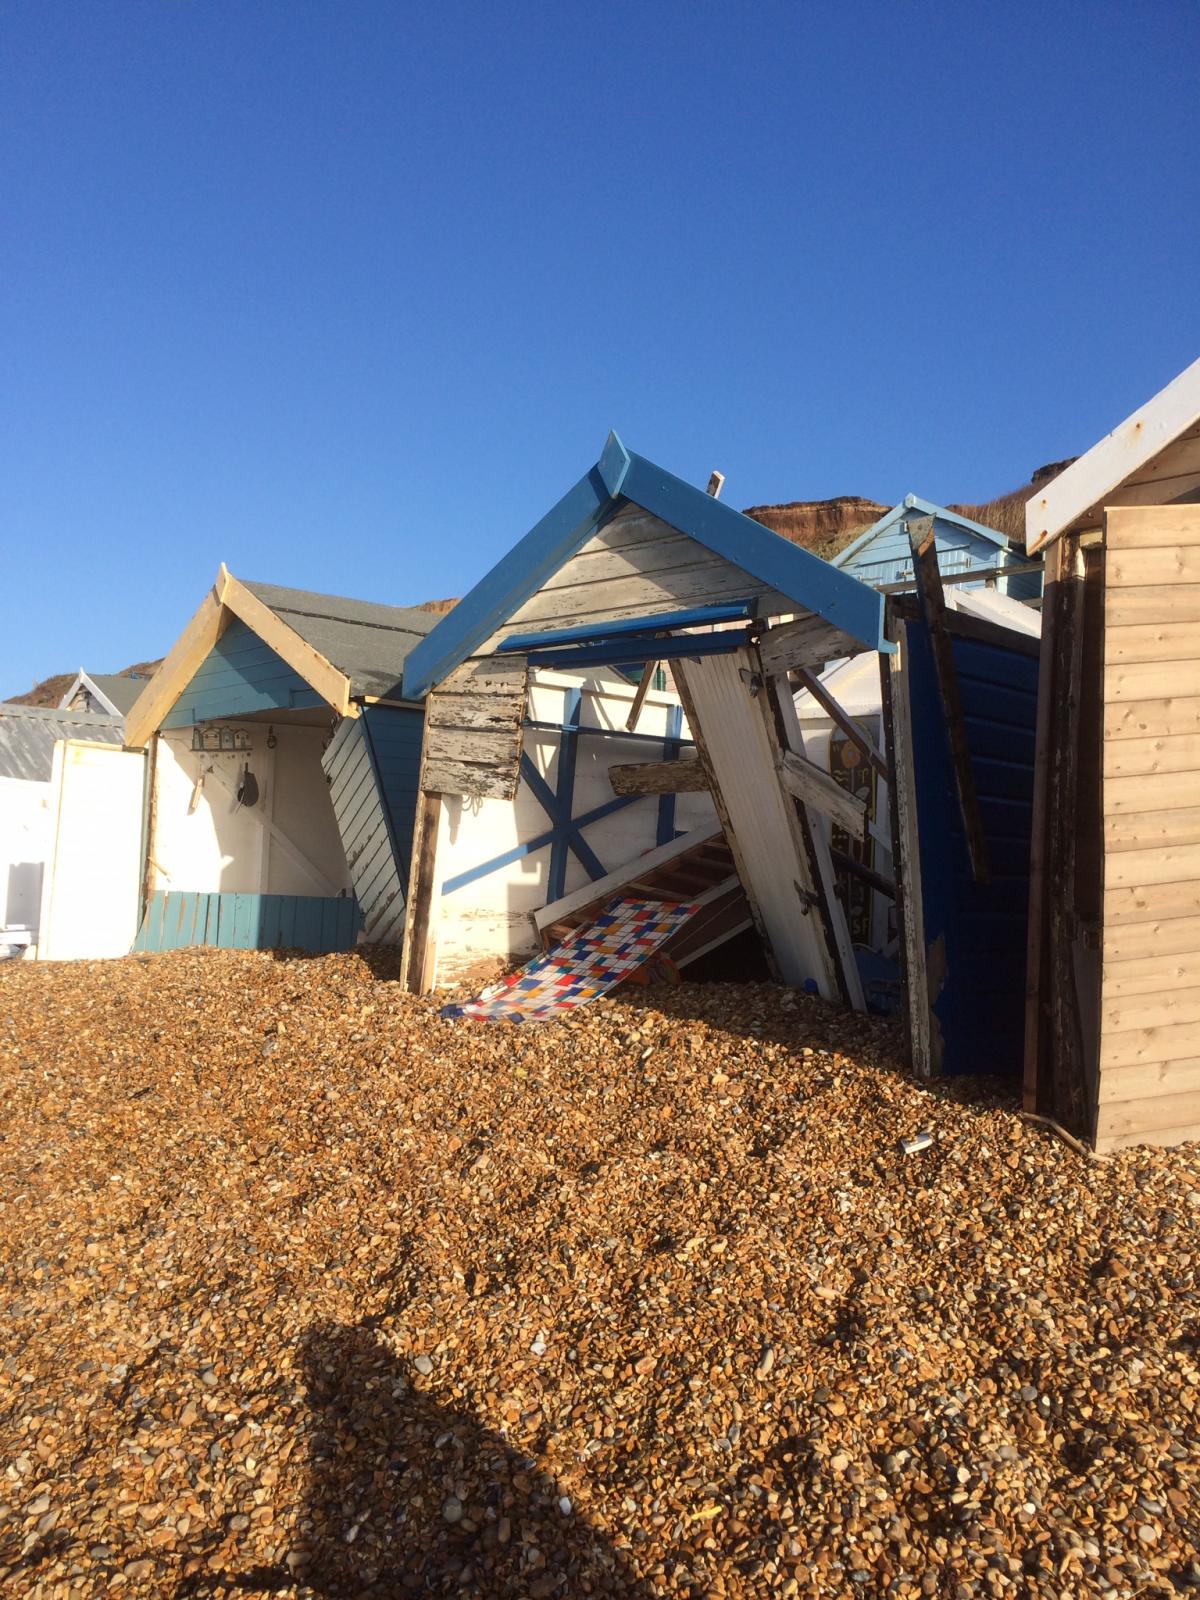 Daily Echo reader photos of the storm and damage left behind after severe weather swept through Dorset on February 14 and February 15. Picture sent by Simon Hill from Milford